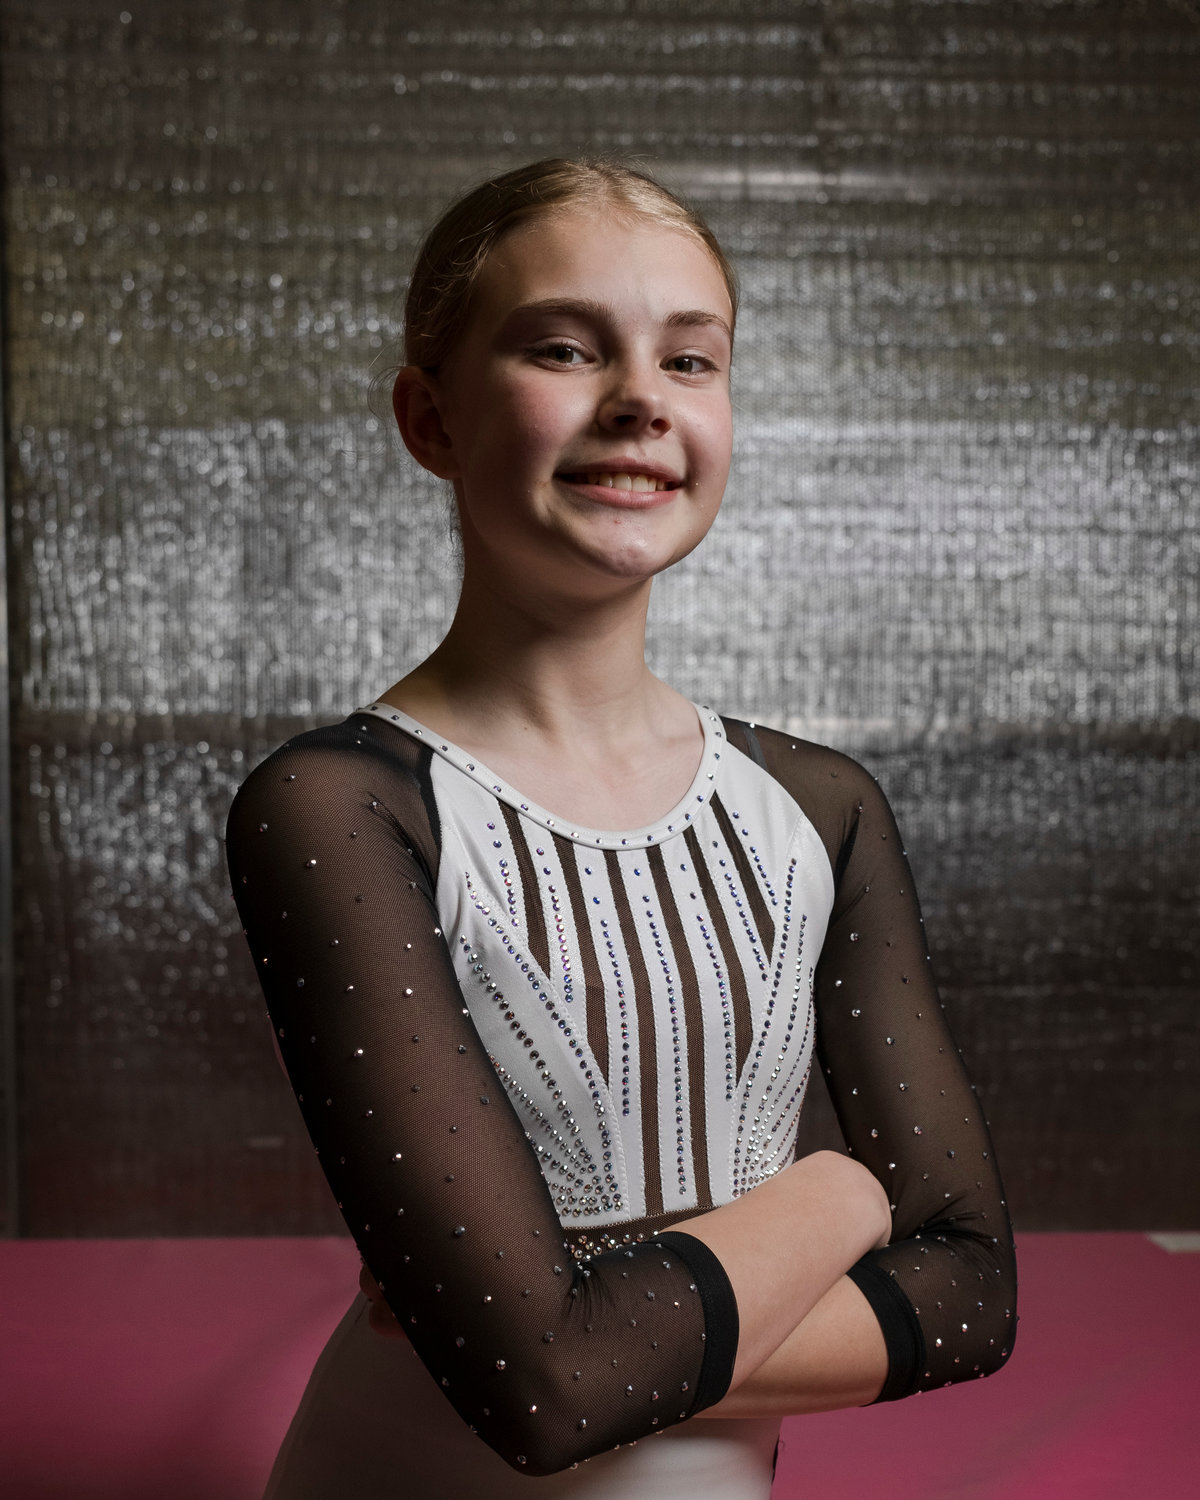 Xcel Gold highlight: Skylar Sipper, 11, is a fifth grader at Belforest Elementary School. This is her third year in gymnastics and second year on the team. Her favorite event is floor because "I love being able to show my true self and what I'm all about."